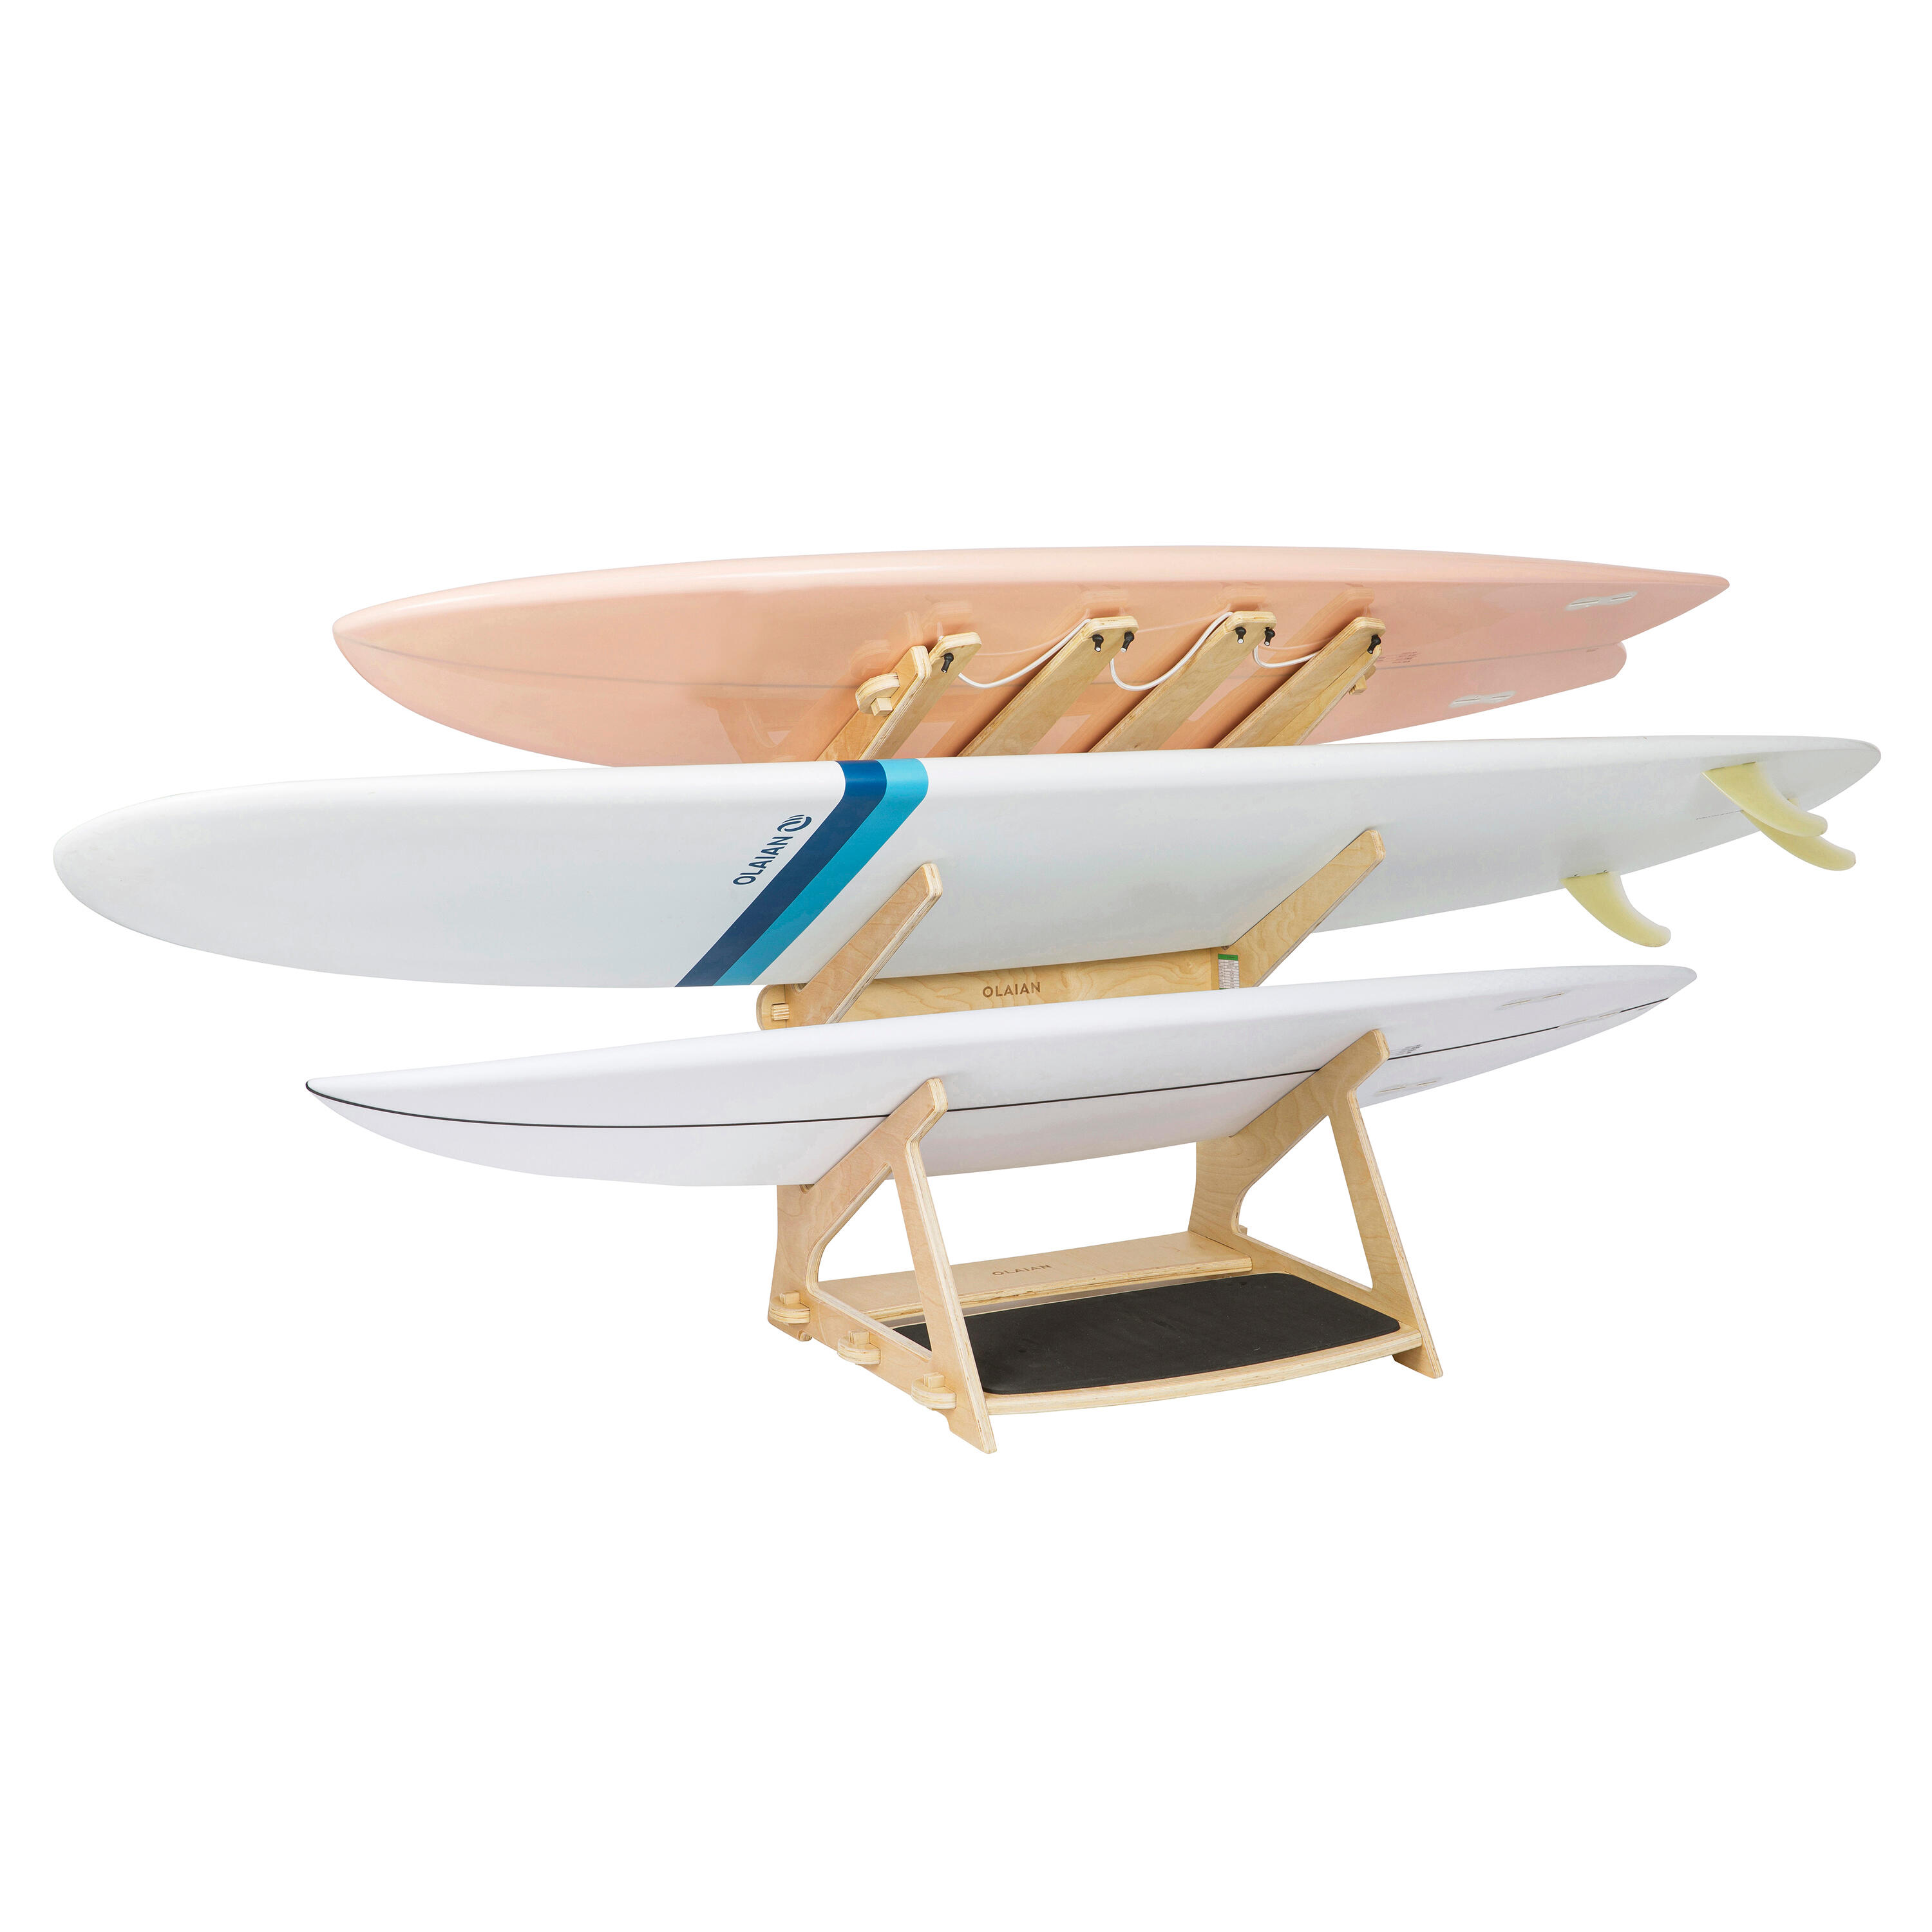 Free-standing SURFBOARD RACK for 3 boards store vertically or horizontally 5/13